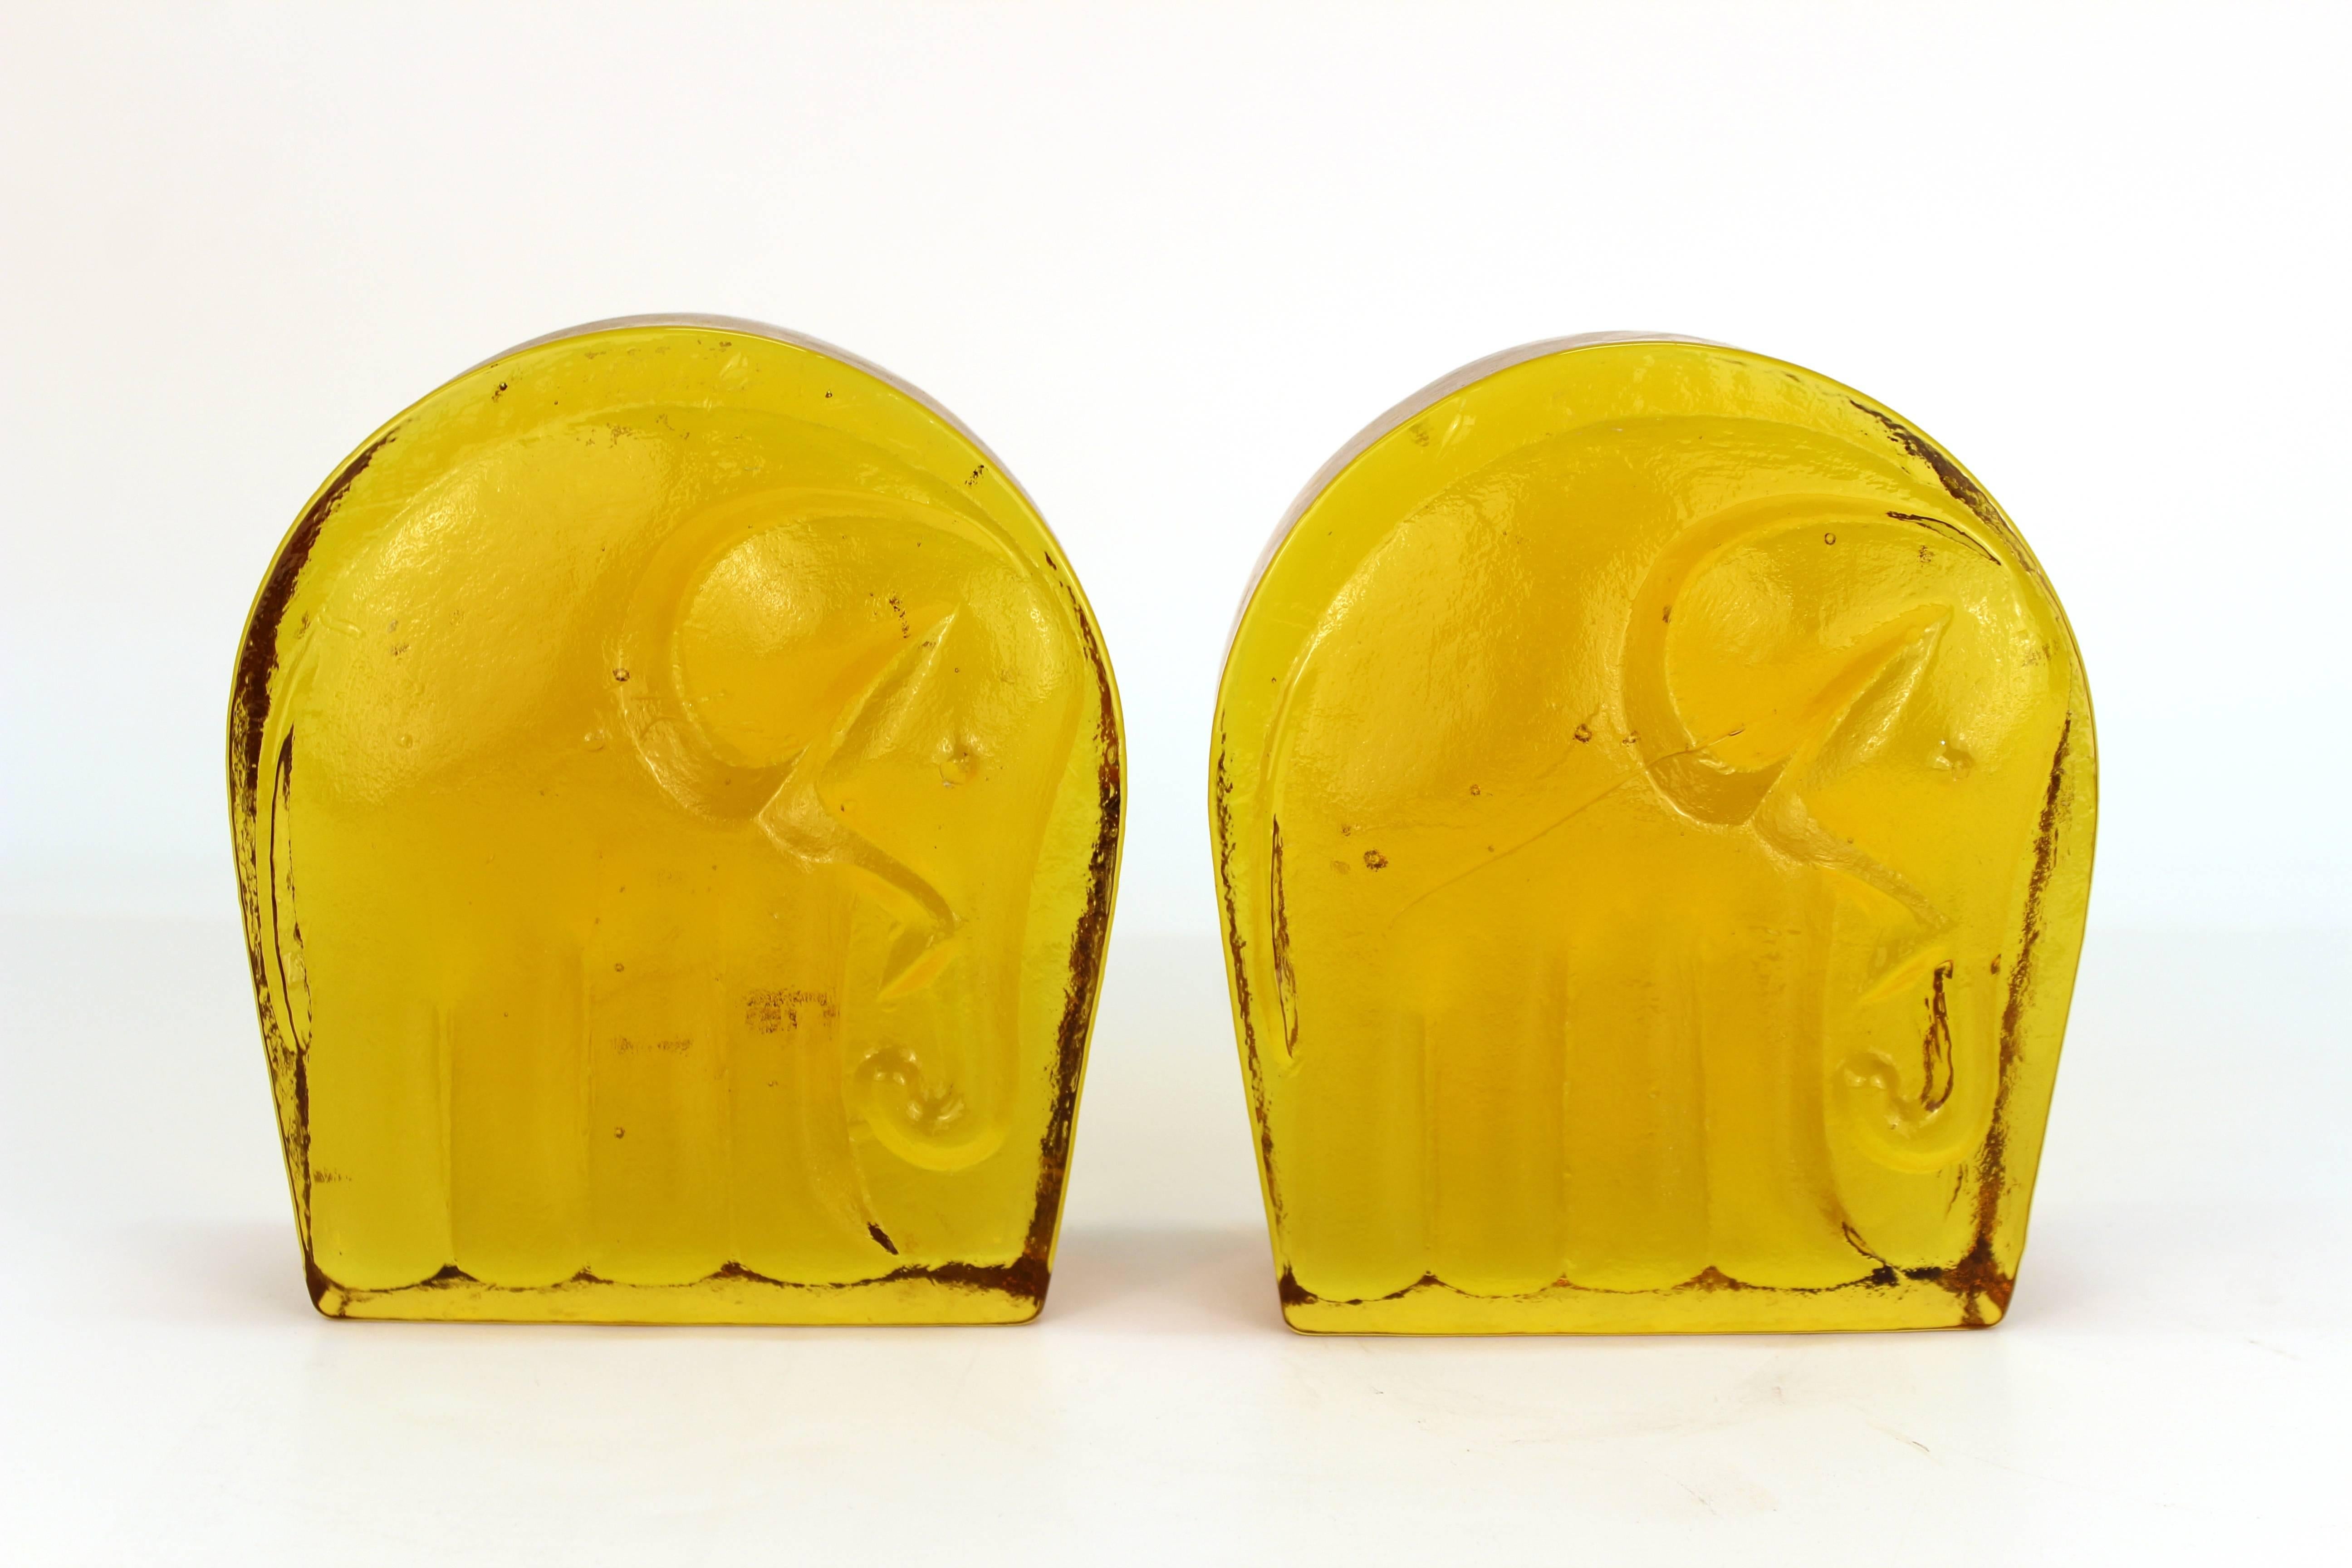 A pair of Mid-Century Modern glass bookends depicting elephants on the front end. The pair was made in the United States by Blenko in the 1960s and is in very good vintage condition.